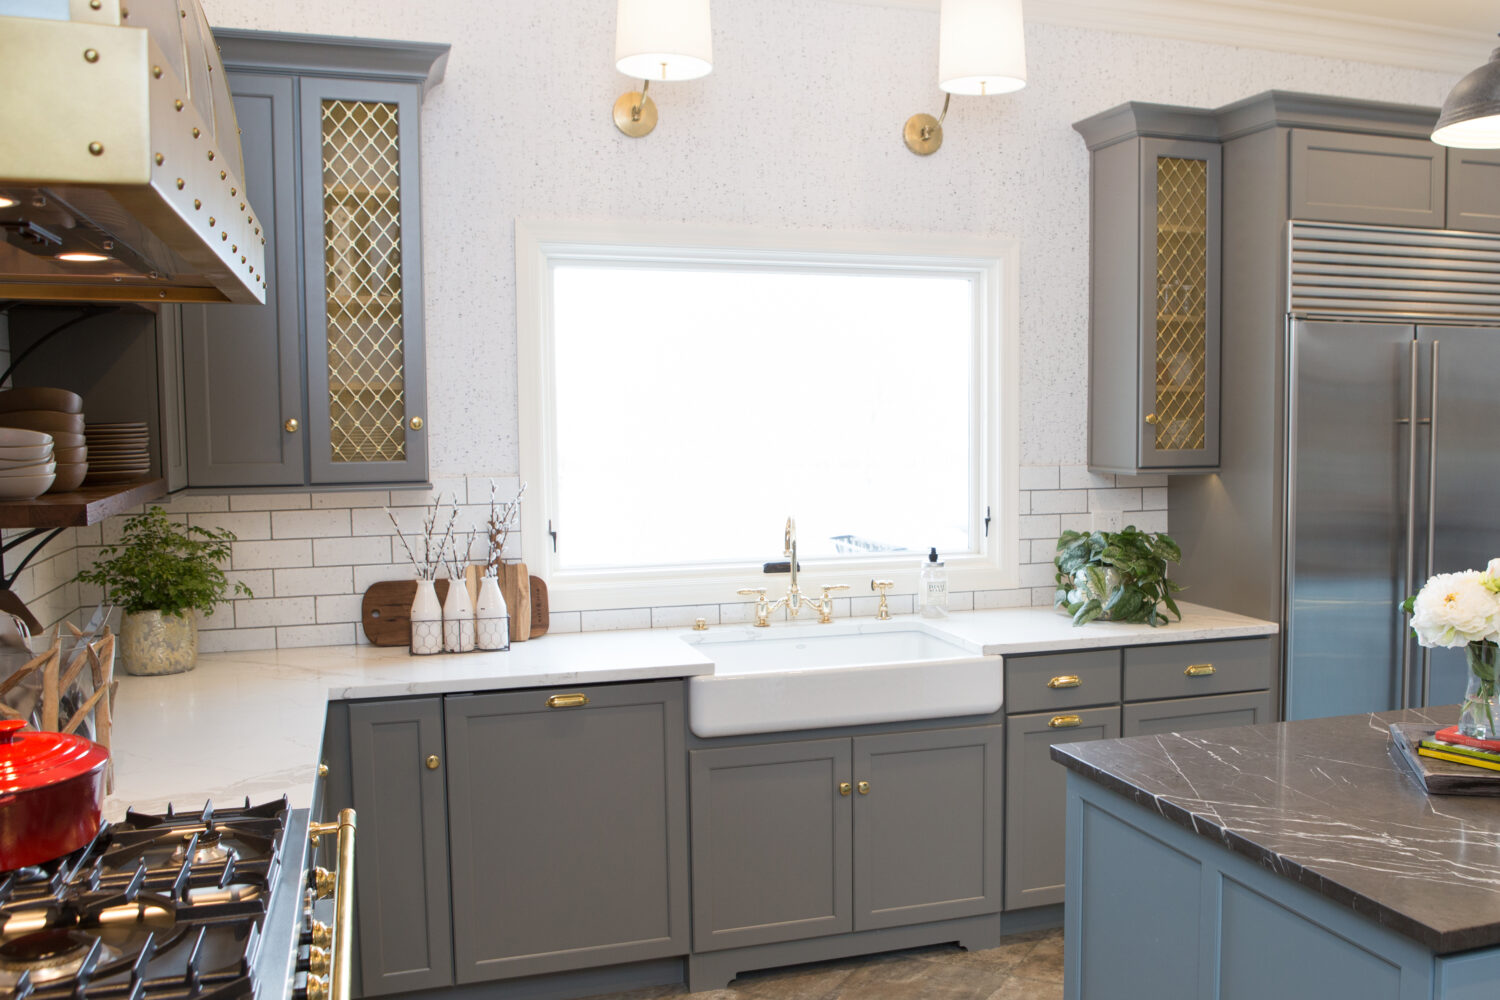 Dura Supreme Cabinetry featuring the Kendall Panel door style in a  gray Personal Paint Match finish.